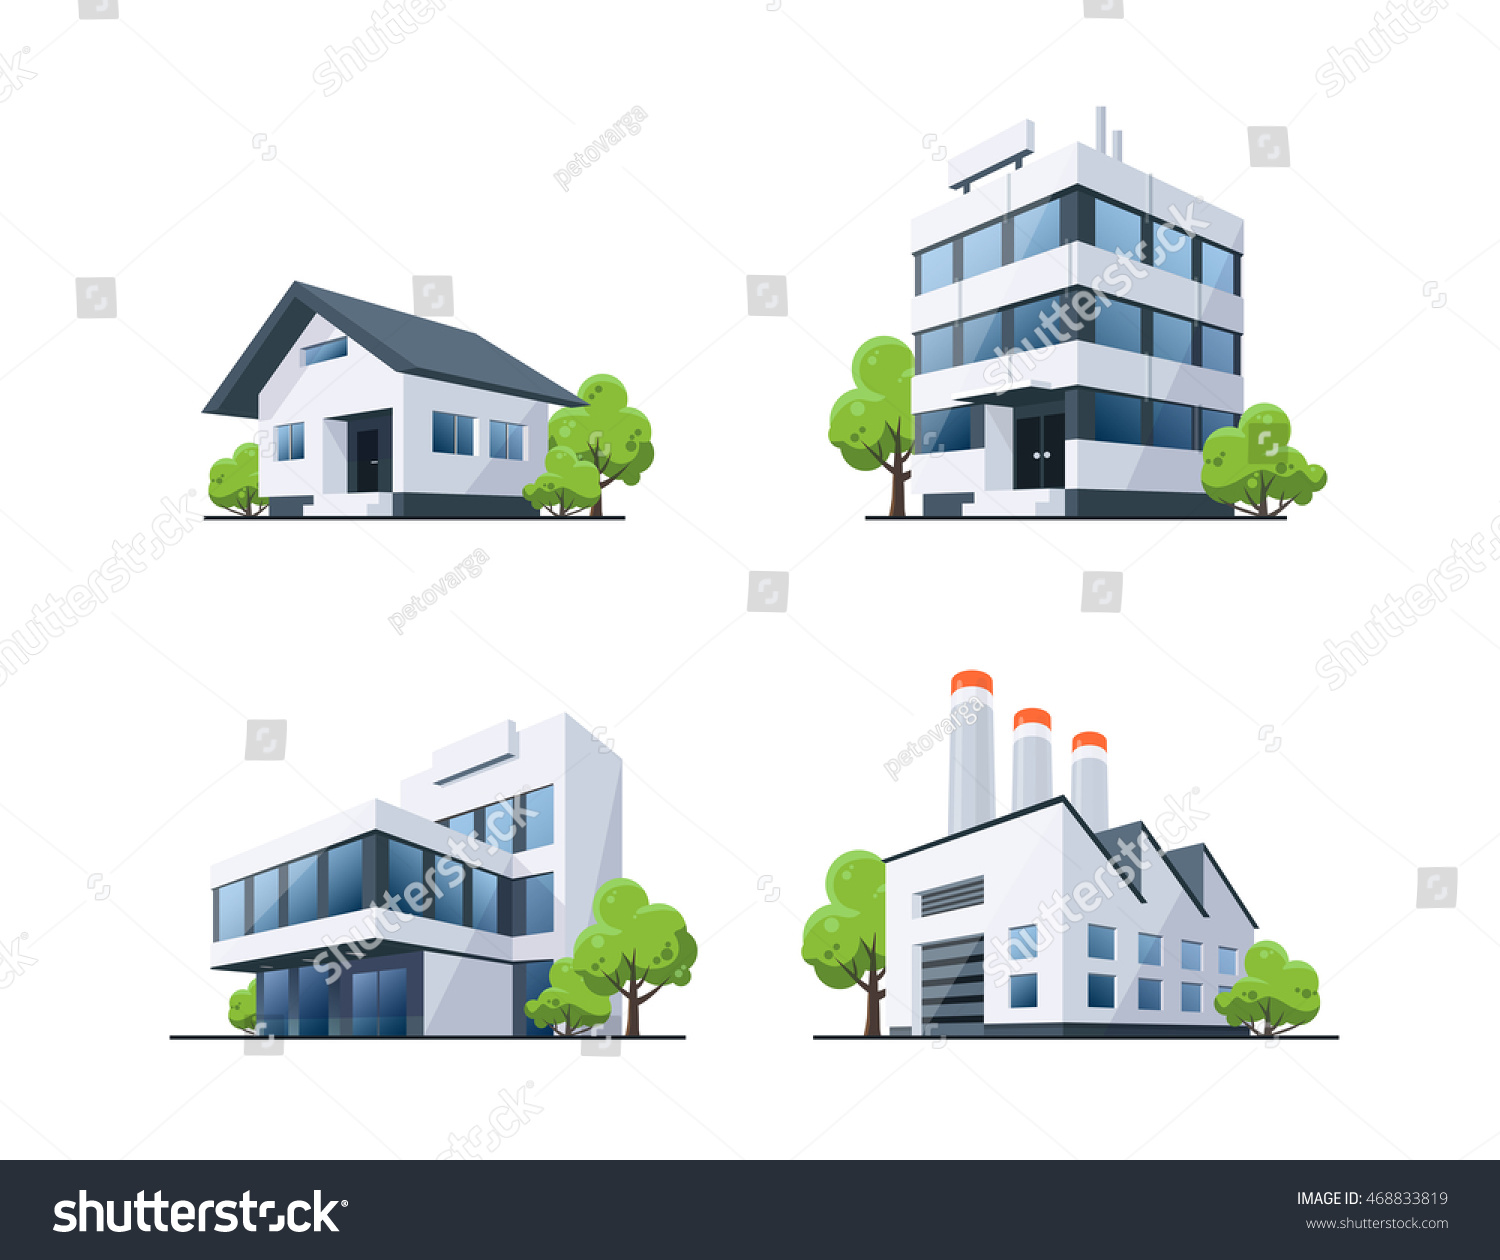 Four vector buildings illustrations in perspective view with green trees in cartoon style. Family house, work office and factory building. #468833819